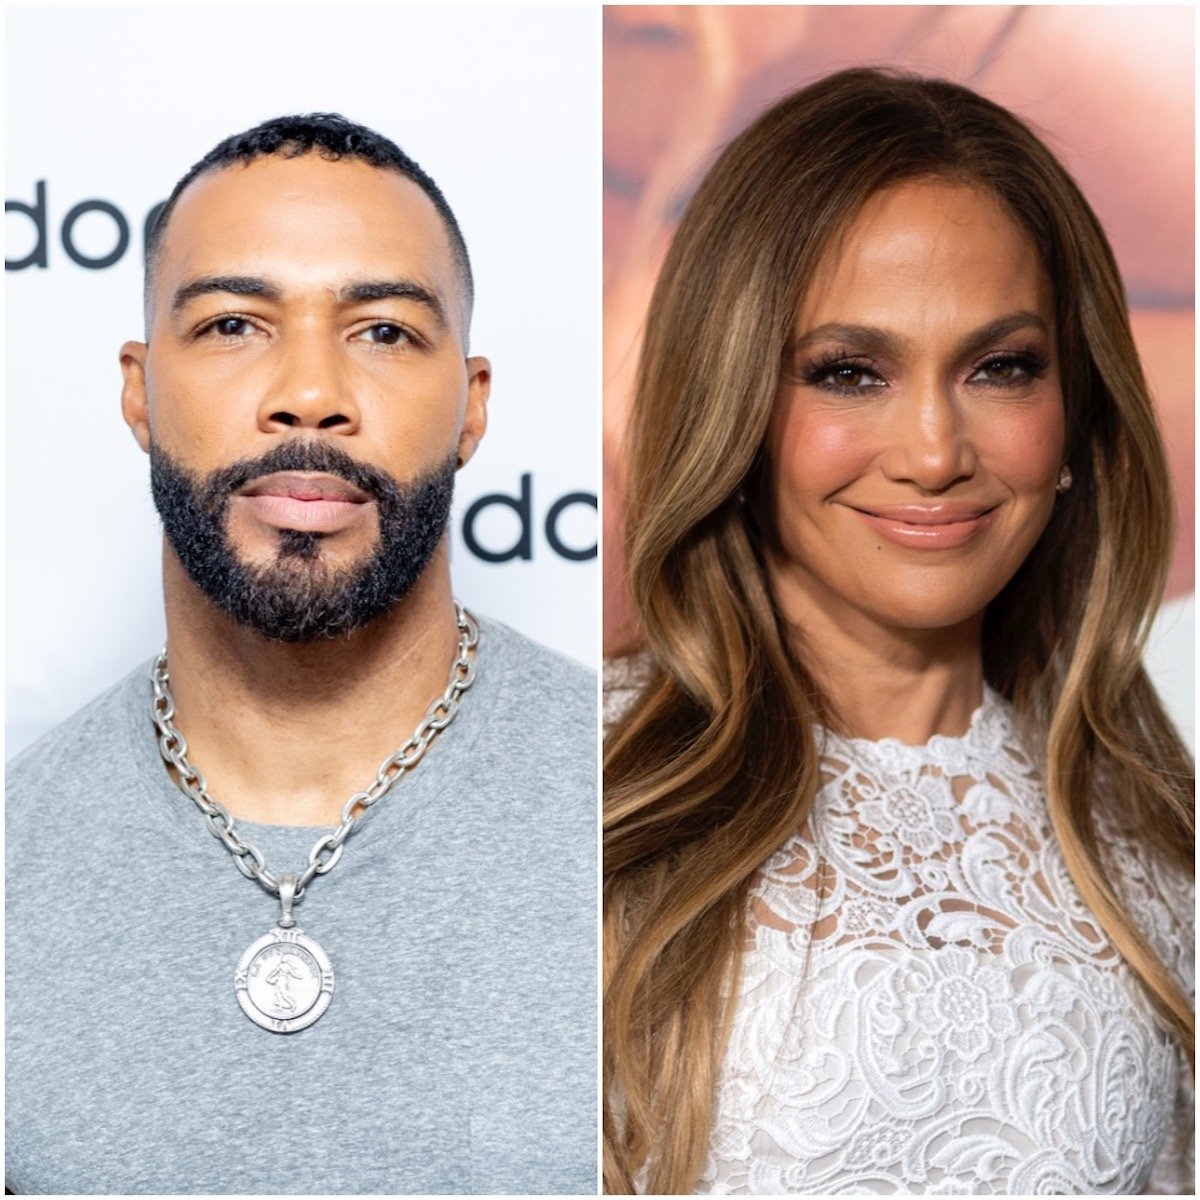 A photo collage of Omari Hardwick and Jennifer Lopez, who will appear in an upcoming Netflix movie together